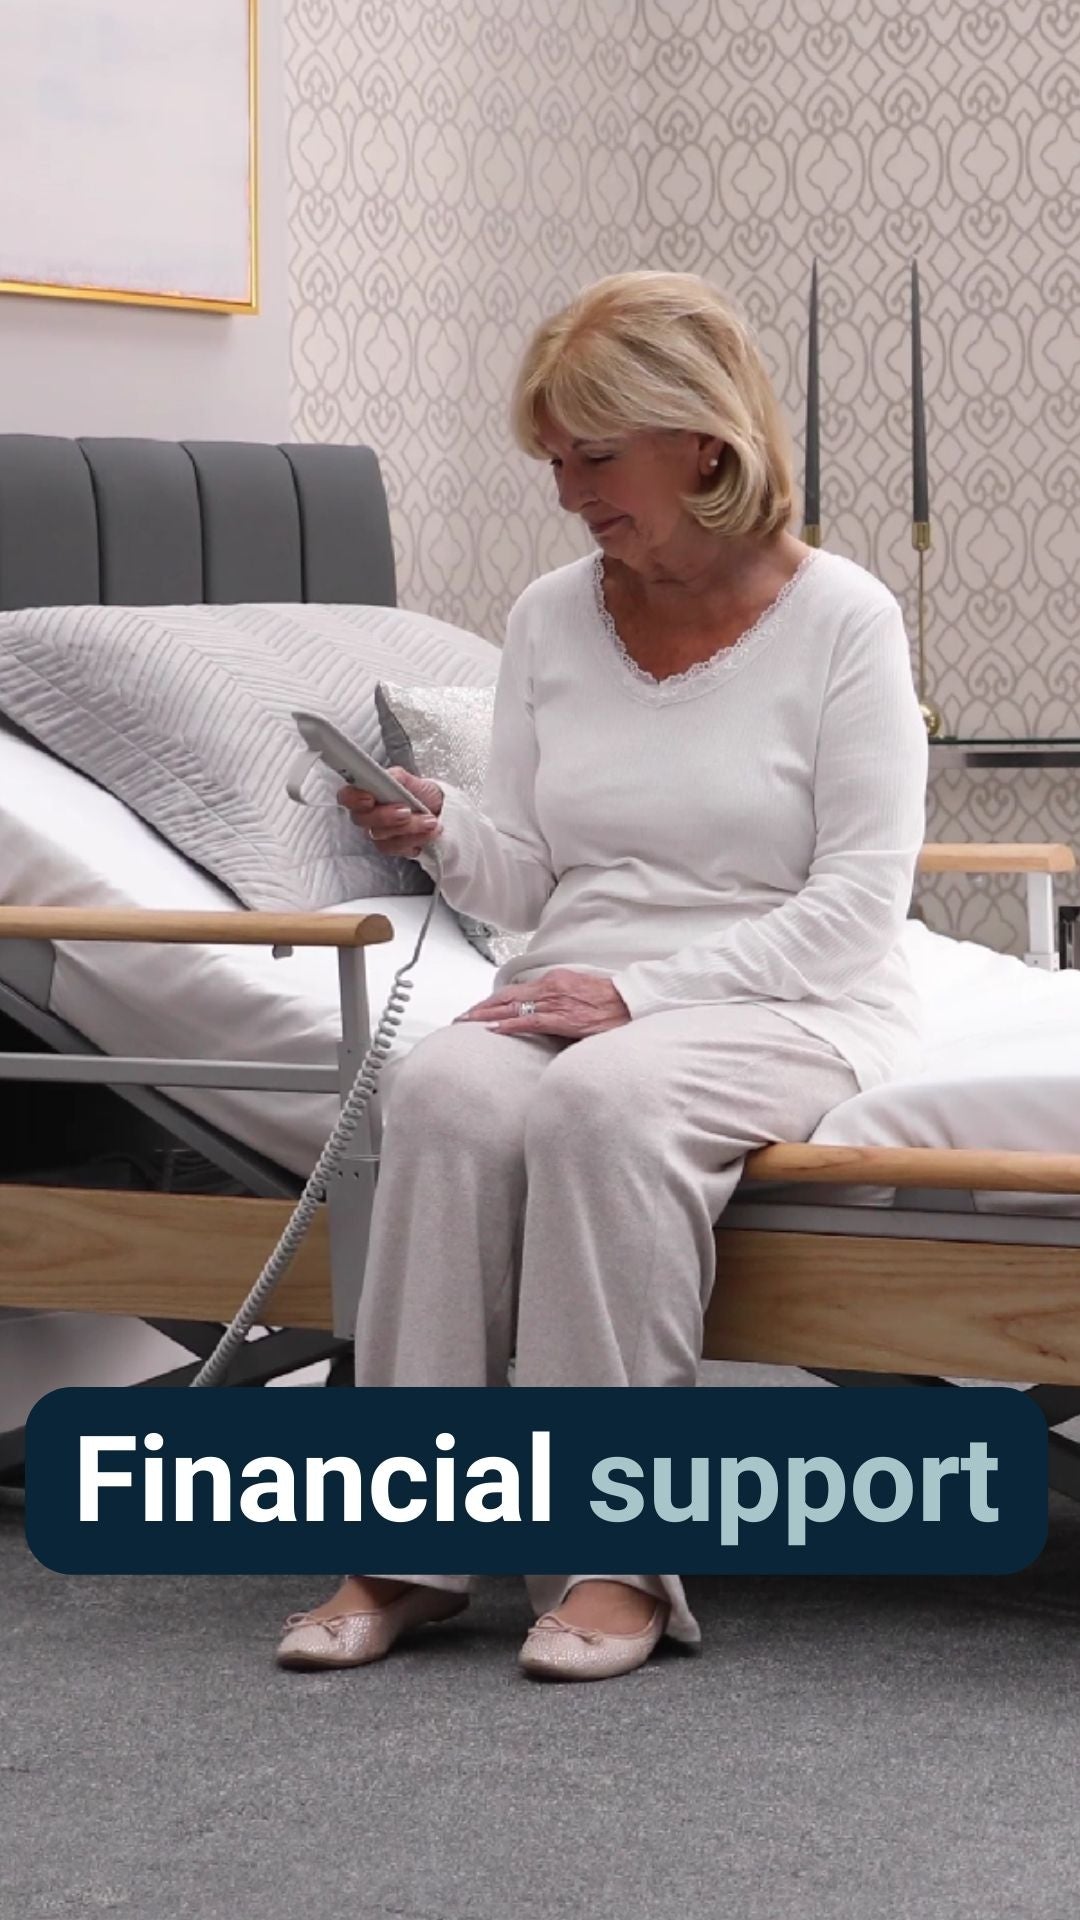 A lady sat on the edge of a profiling bed holding remote with the caption 'Financial support'